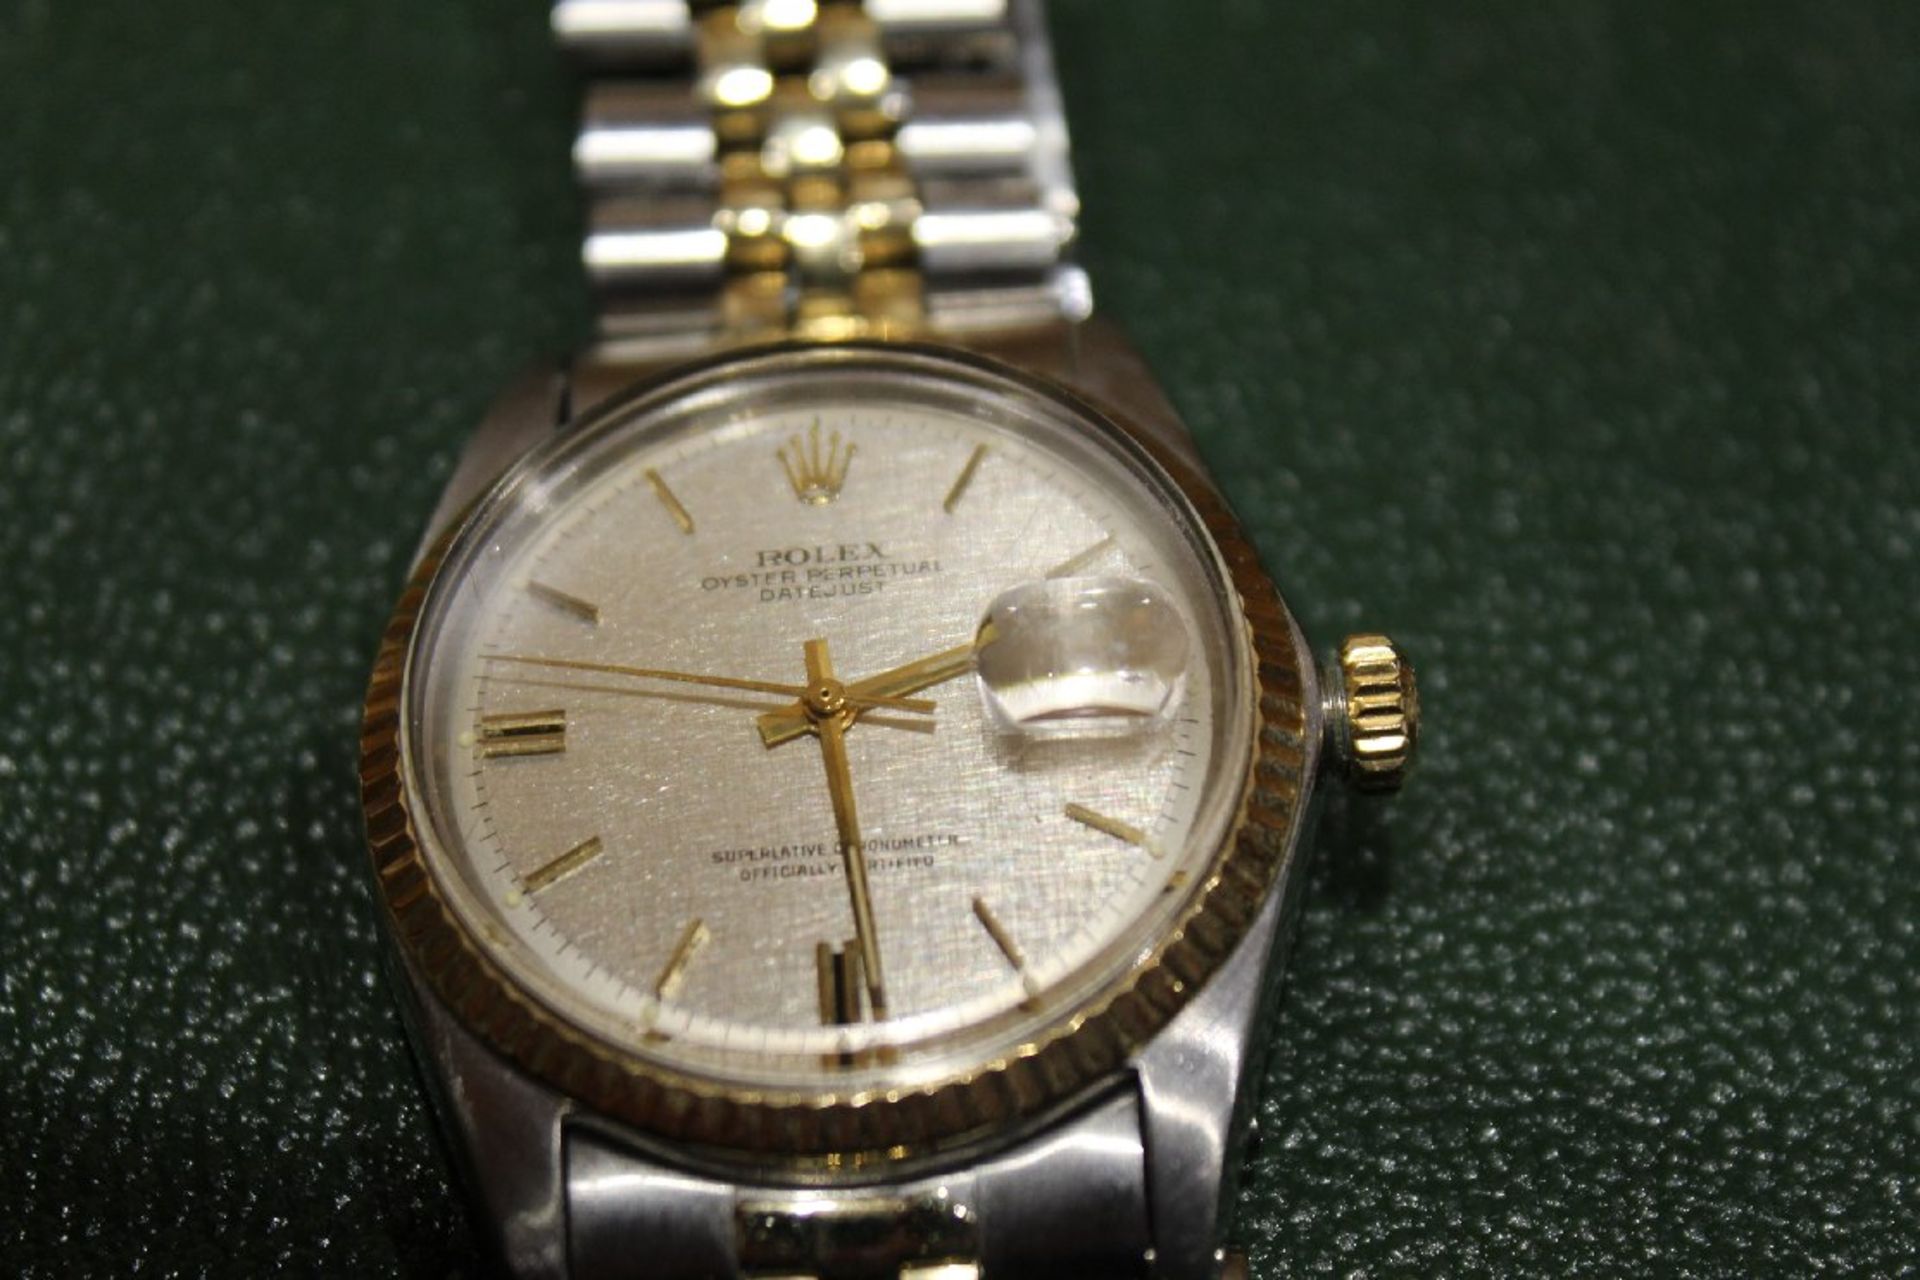 Rolex Oyster Watch. Sterling Silver & 14kt Yellow Gold. SN 2221498 - Purchased in 1971 - Image 4 of 7